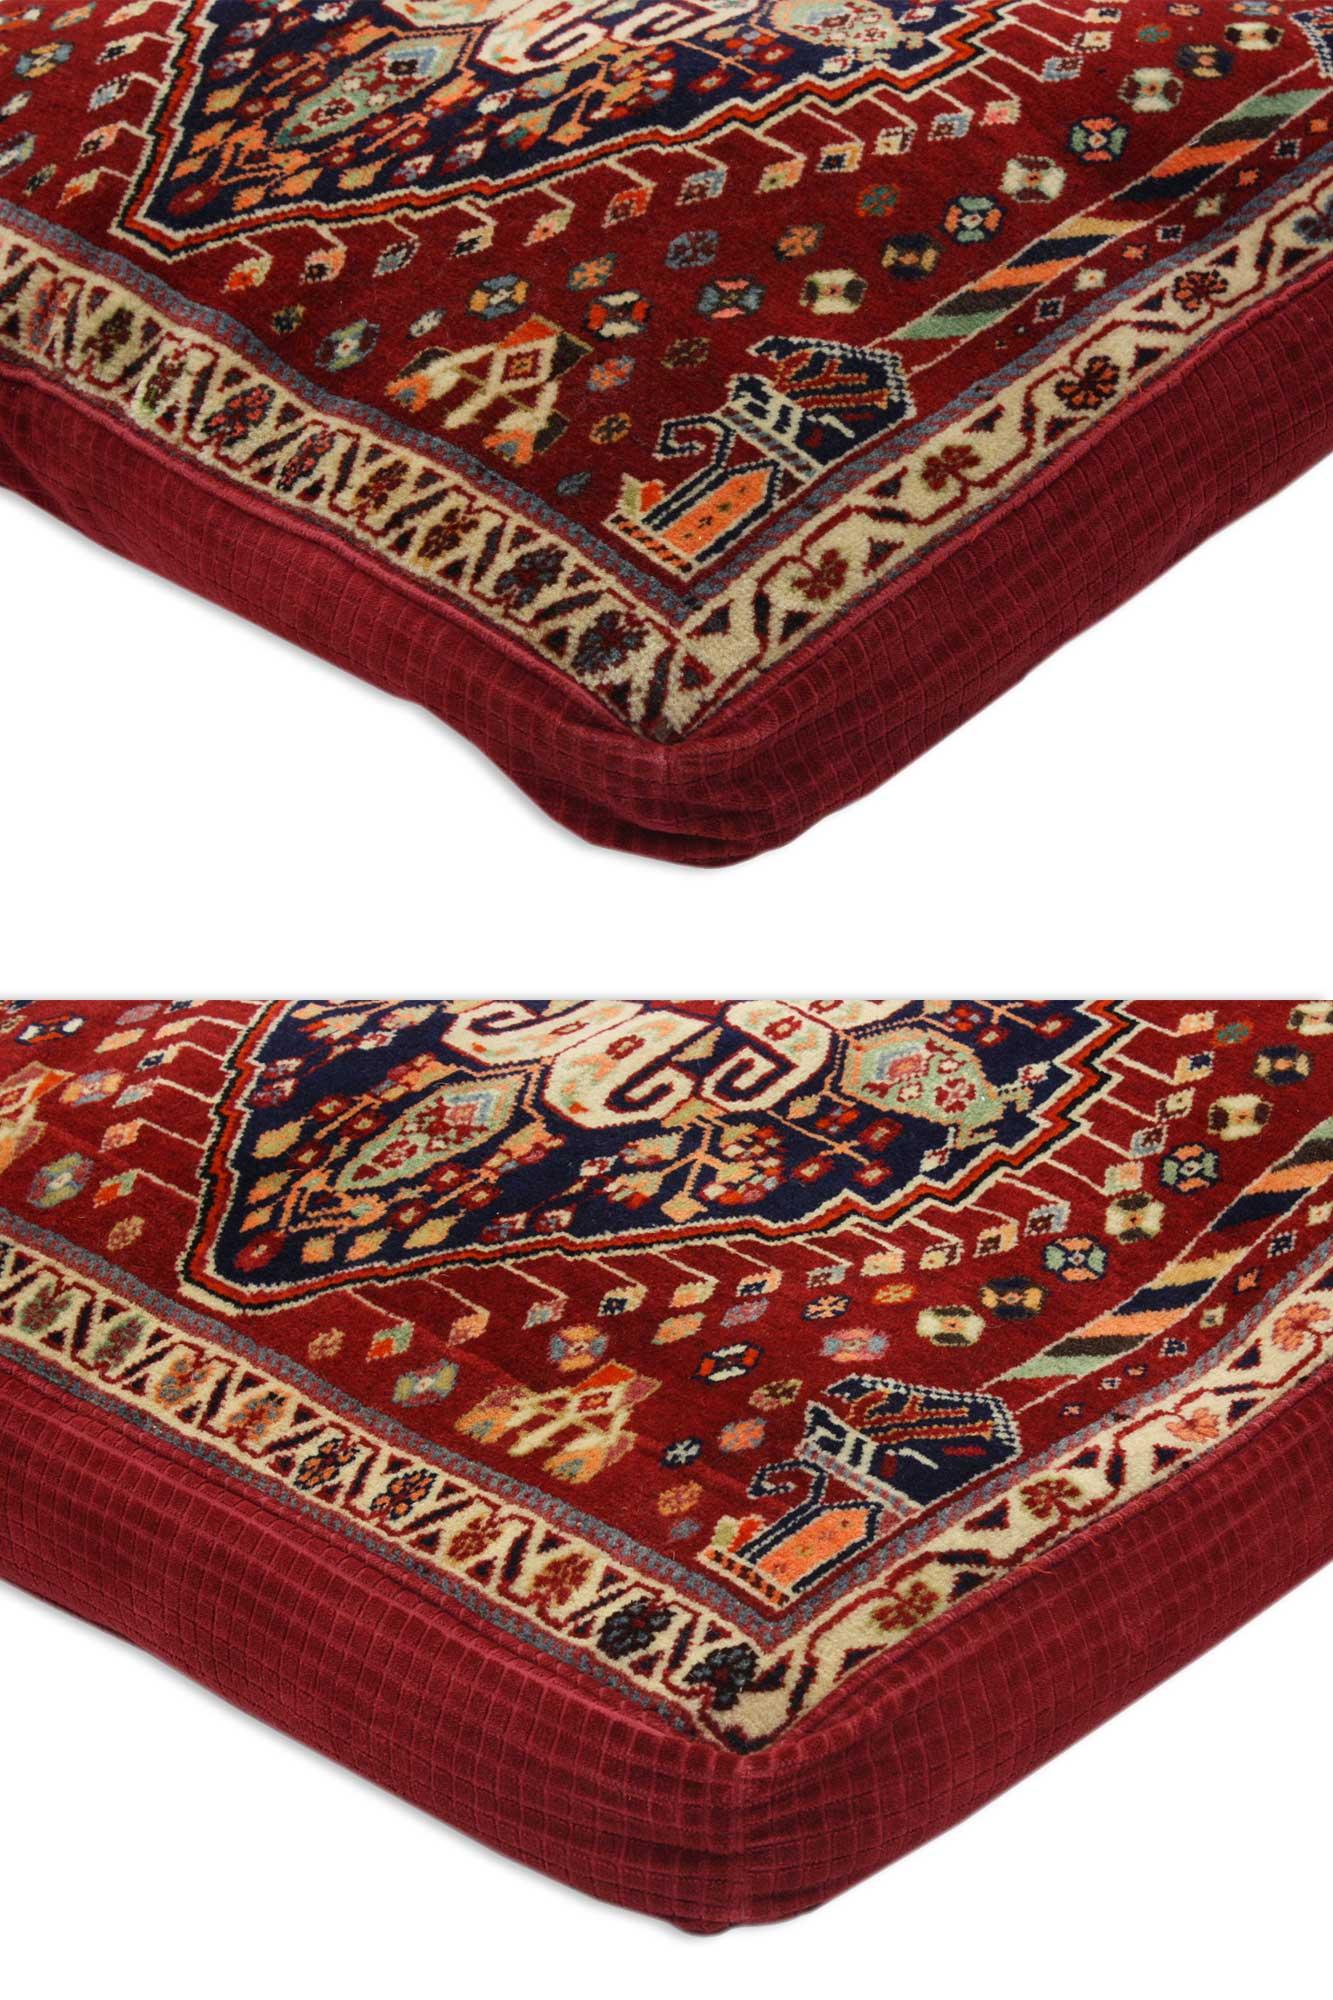 76799-76800 pair of antique Persian Ghashghaei floor pillow cushions.
Dating from around about the 1900s, this is a gorgeous example of an antique Persian Ghashghaei pillow poshit cushion that was used in nomad tents. This hand knotted wool antique